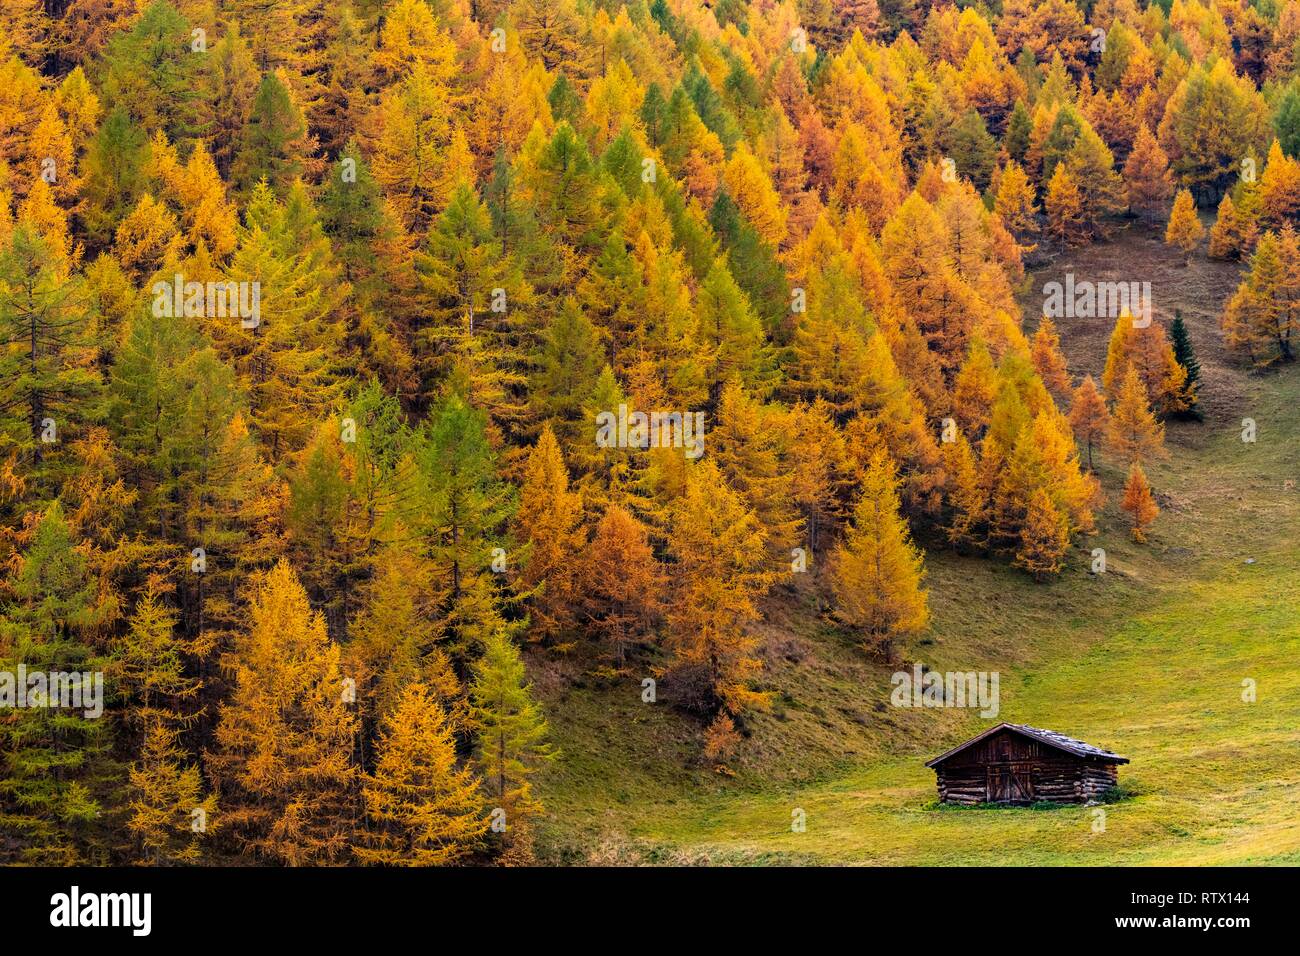 Autumn mountain larch forest (Larix decidua) with small mountain hut in a meadow, Vals, Valstal, South Tyrol, Italy Stock Photo